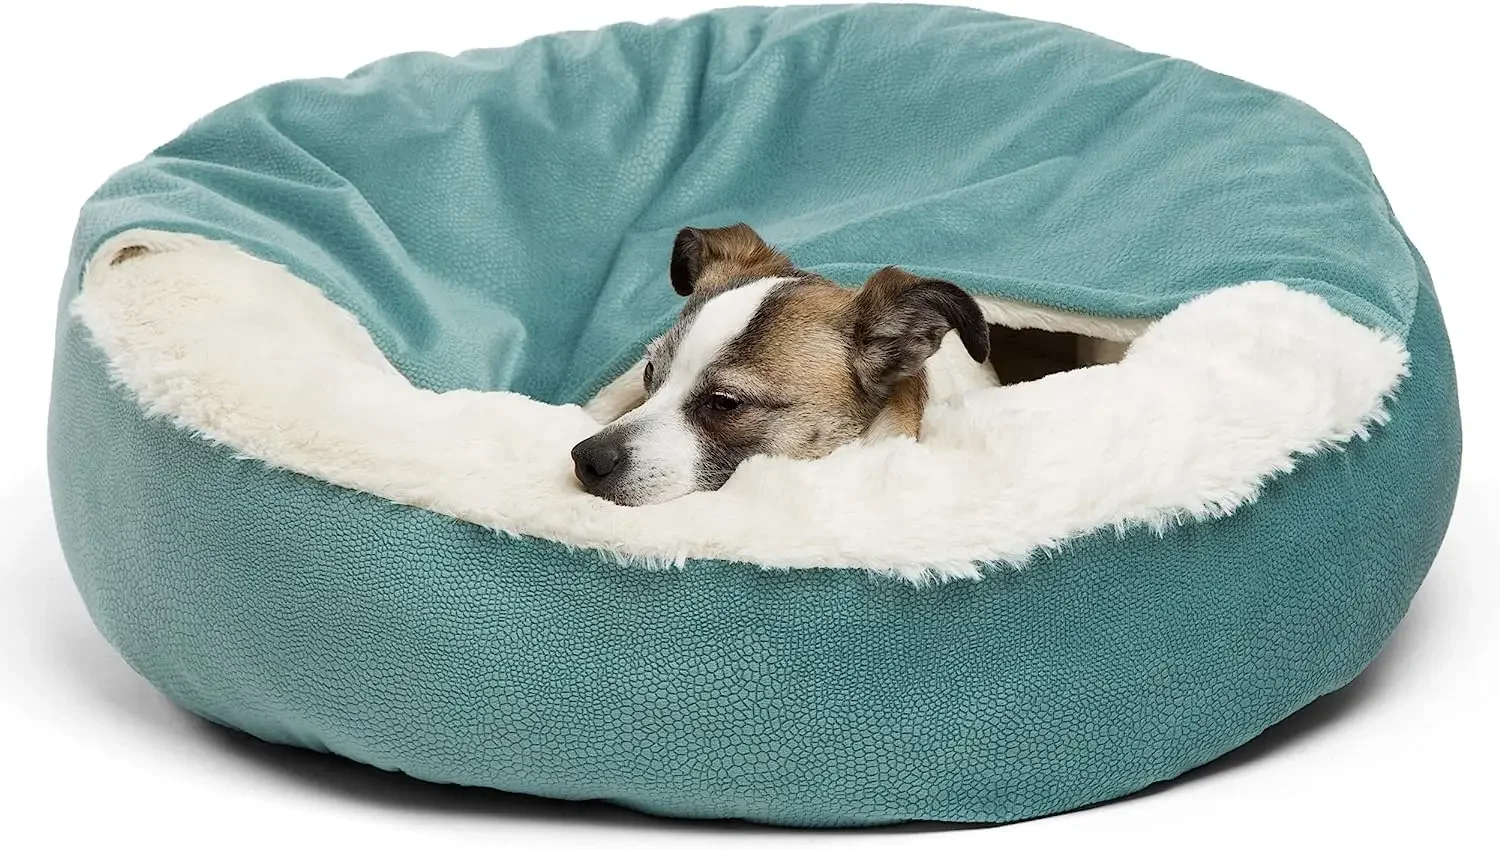 

Blanket Soft Cat Beds Bed Bed Calming Round Plush Cozy Orthopedic Attached Pet Washable Dog Hooded Donut Cuddler Cat With Cave